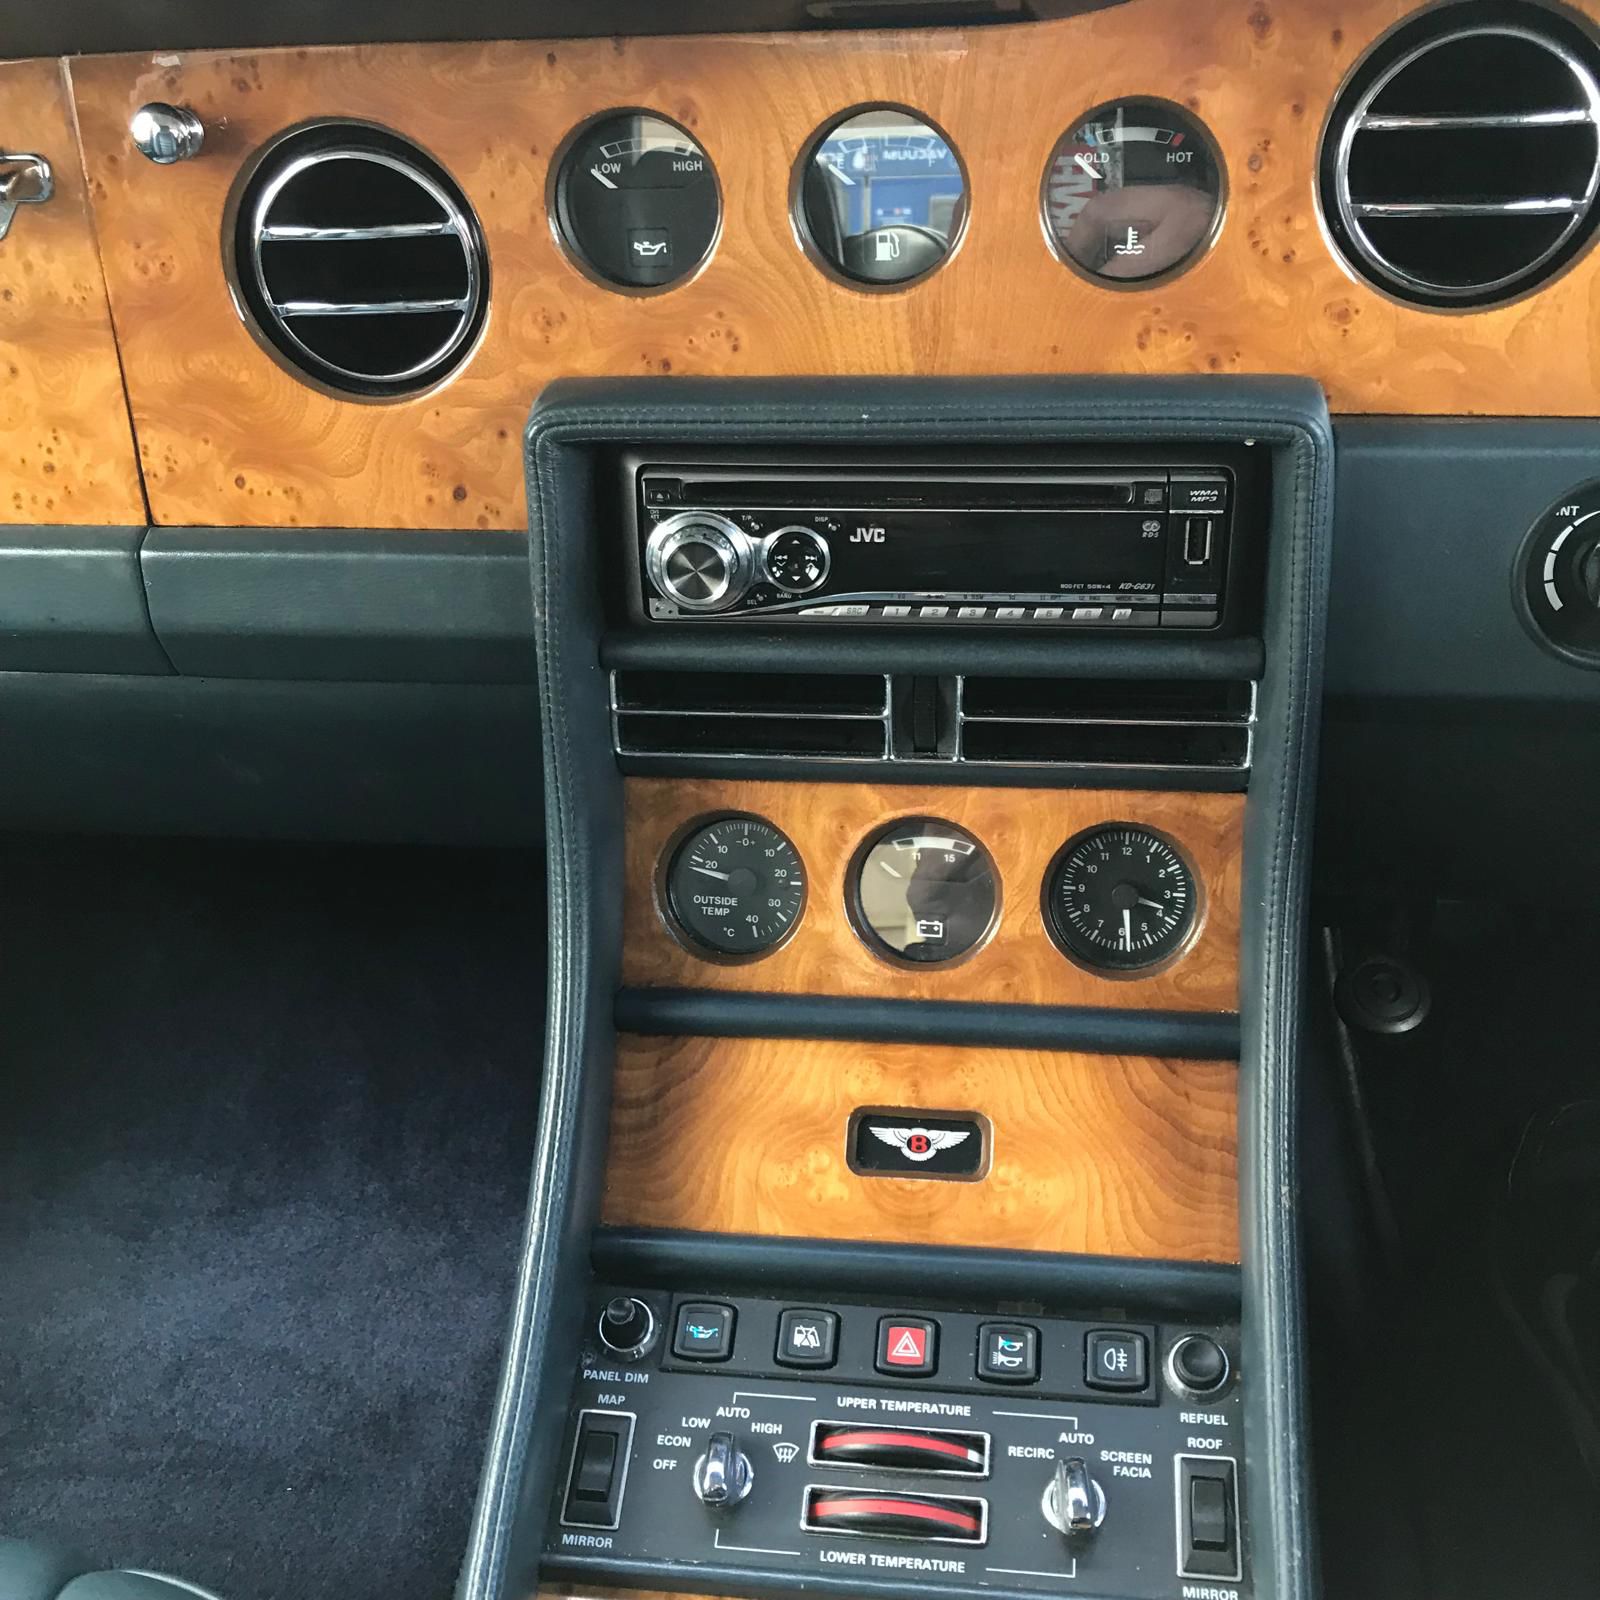 1990 Bentley Mulsanne S - Entry level motoring at a low estimate - Image 10 of 22